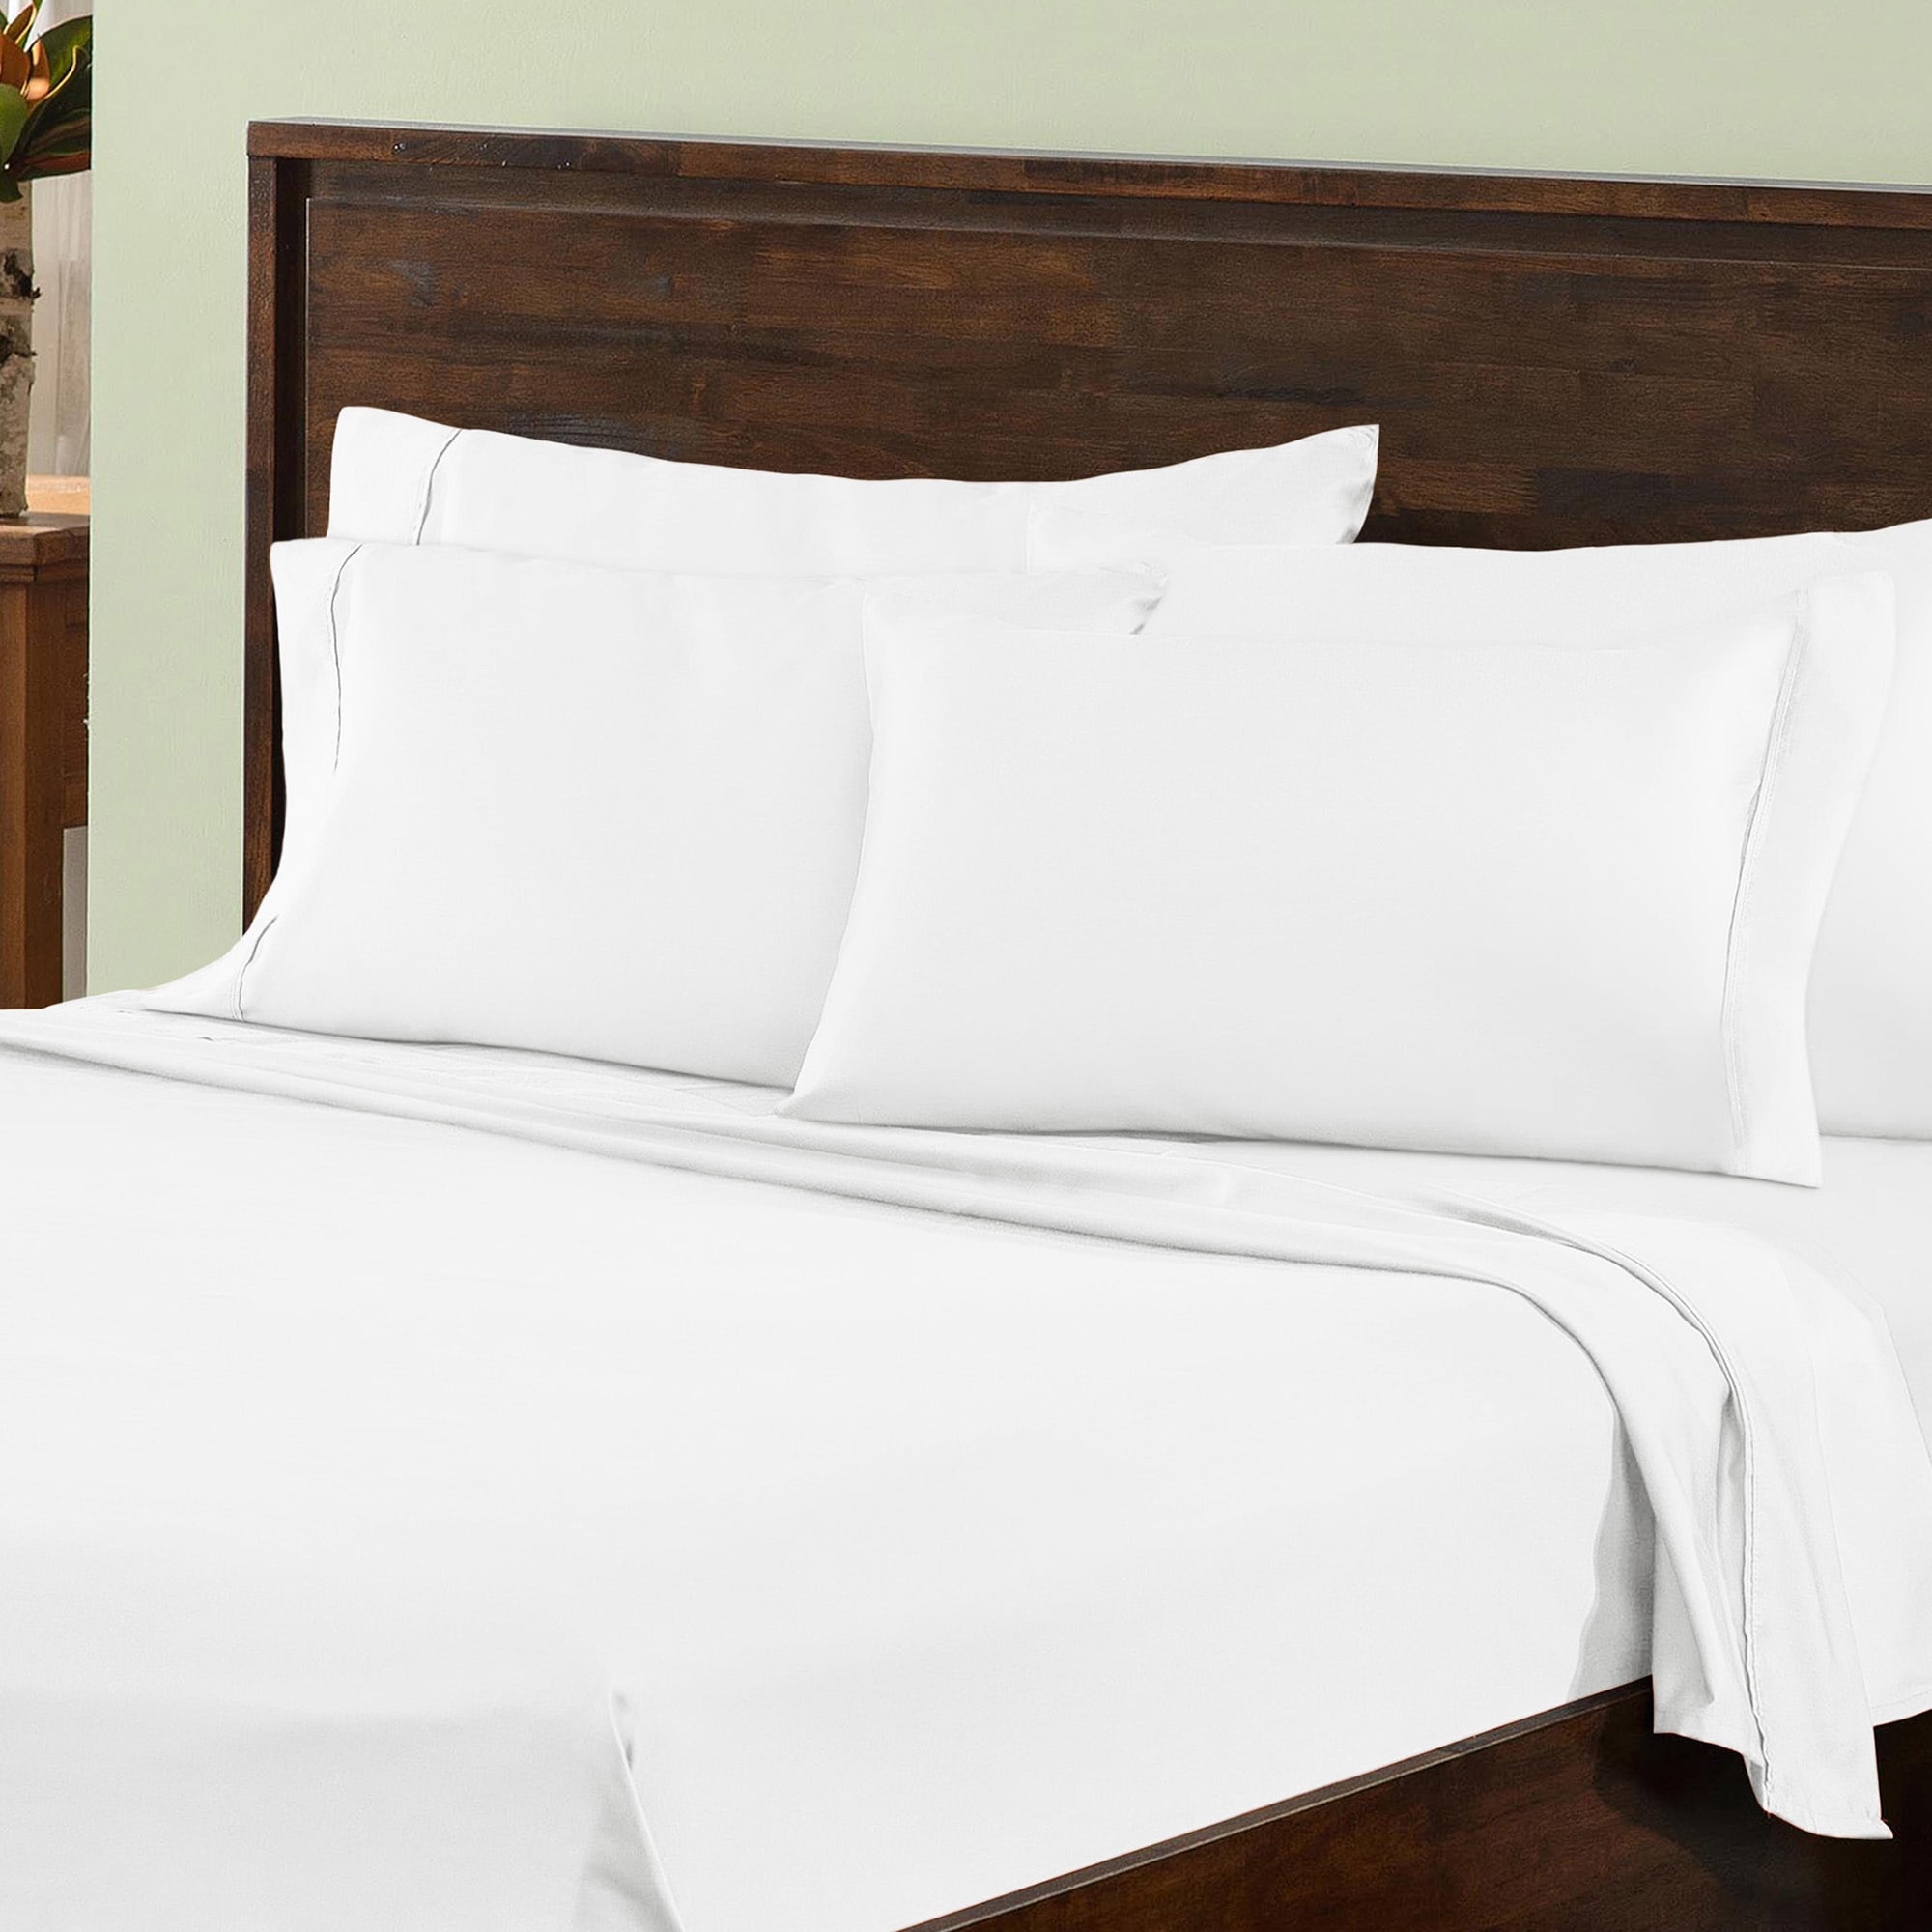 "Bed Sheet Set" All Solid Colors & Sizes 1000 Thread Count Egyptian Cotton 